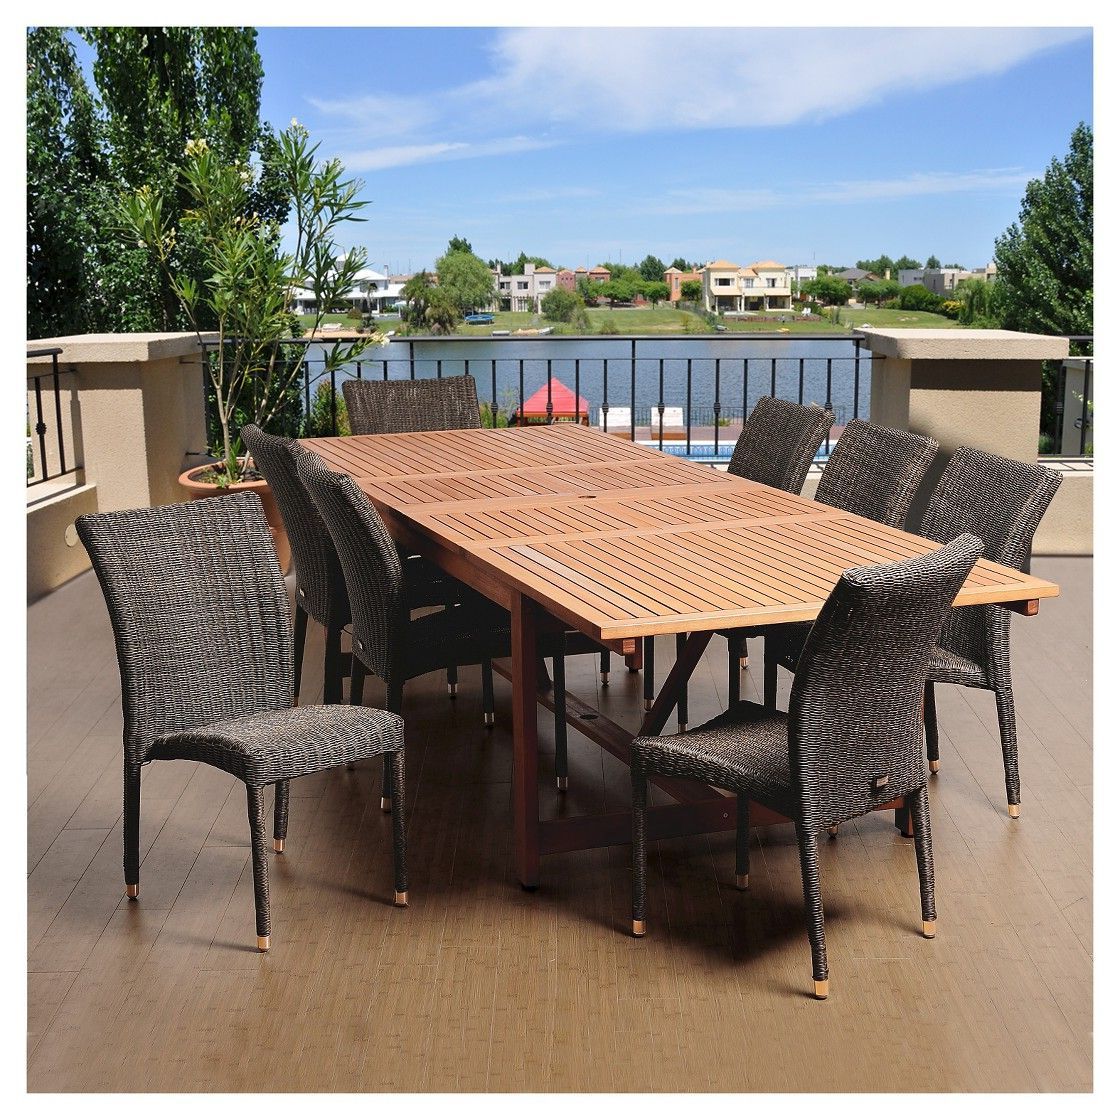 Eucalyptus Extendable Patio Dining Sets With Most Current Panama Beach 9 Pc Eucalyptus/wicker Extendable Rectangular Patio Dining (View 3 of 15)